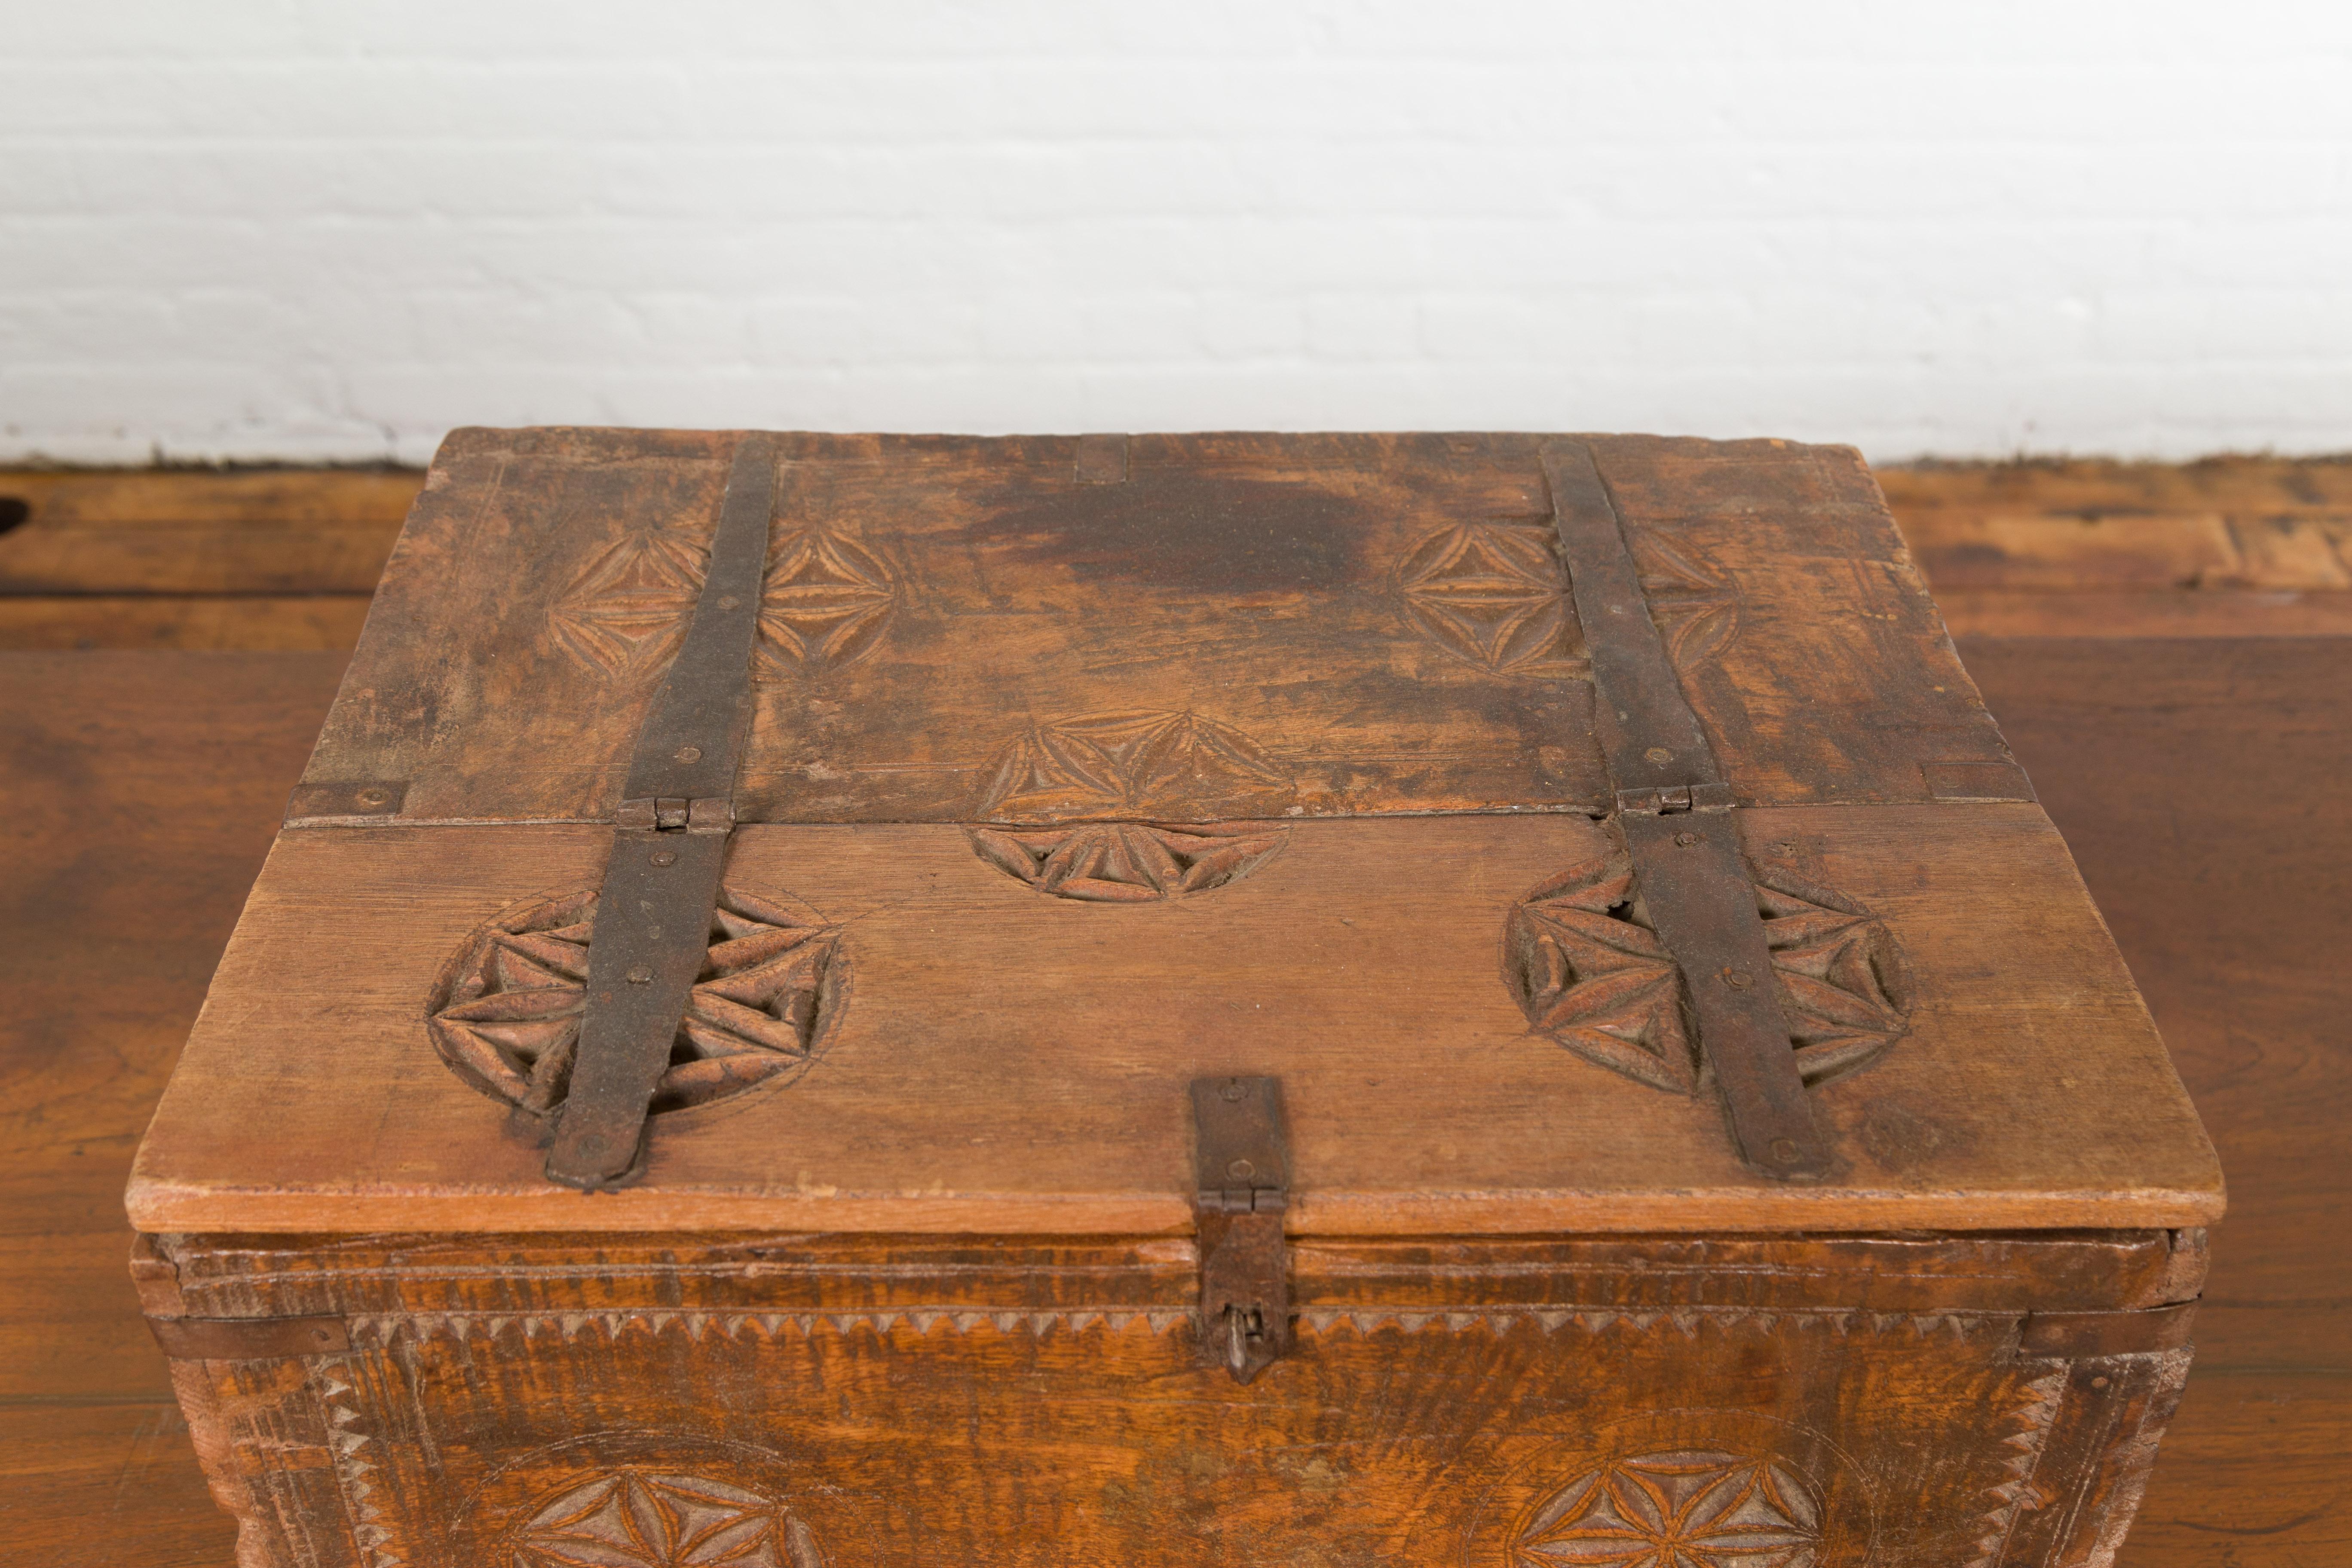 Indian 19th Century Small Wooden Box with Iron Hardware and Carved Rosacea For Sale 4